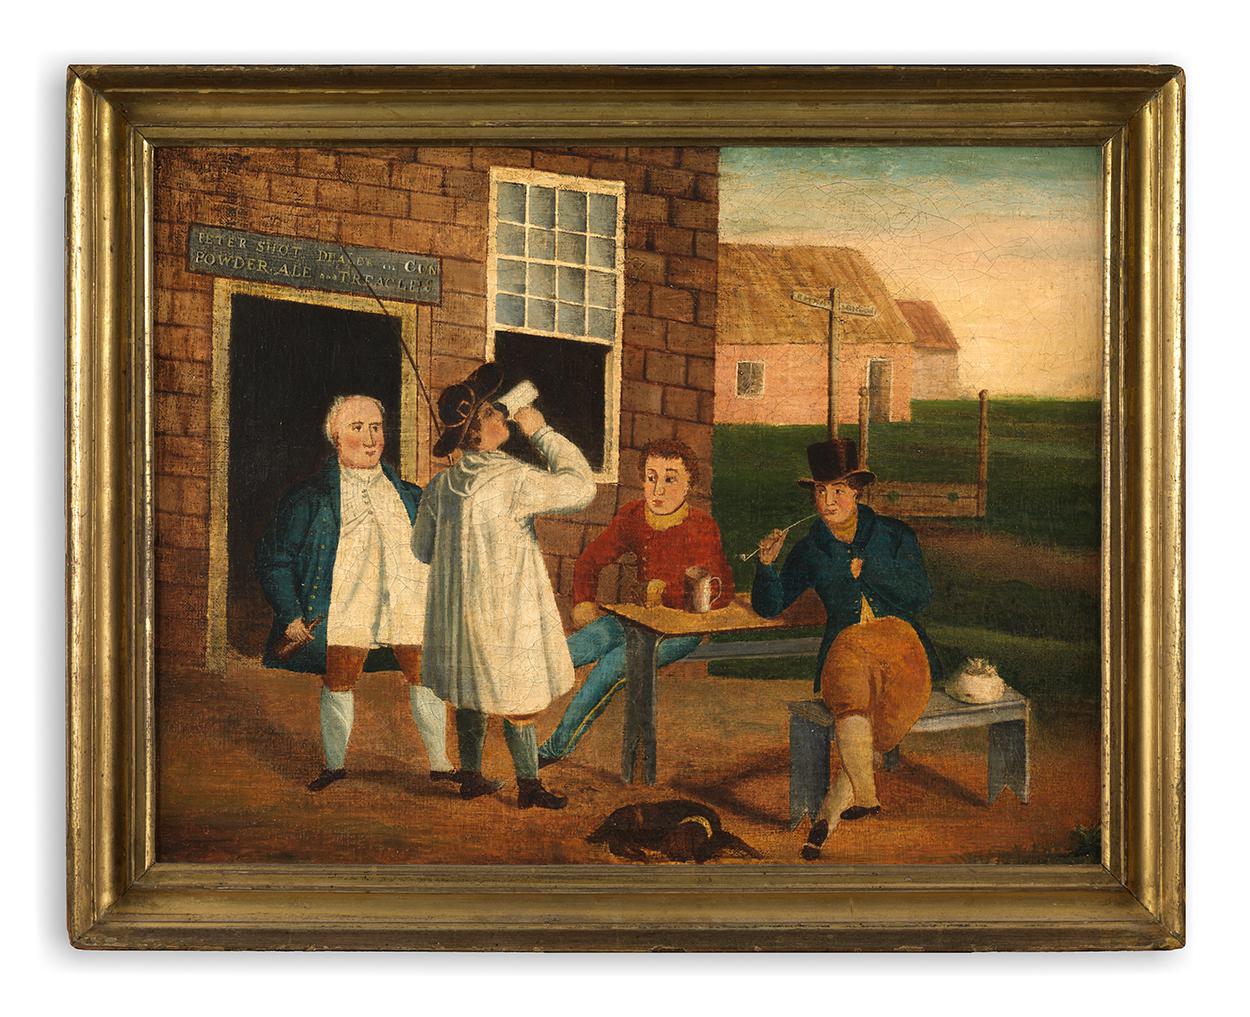 Figures Gathered Together Outside a Tavern